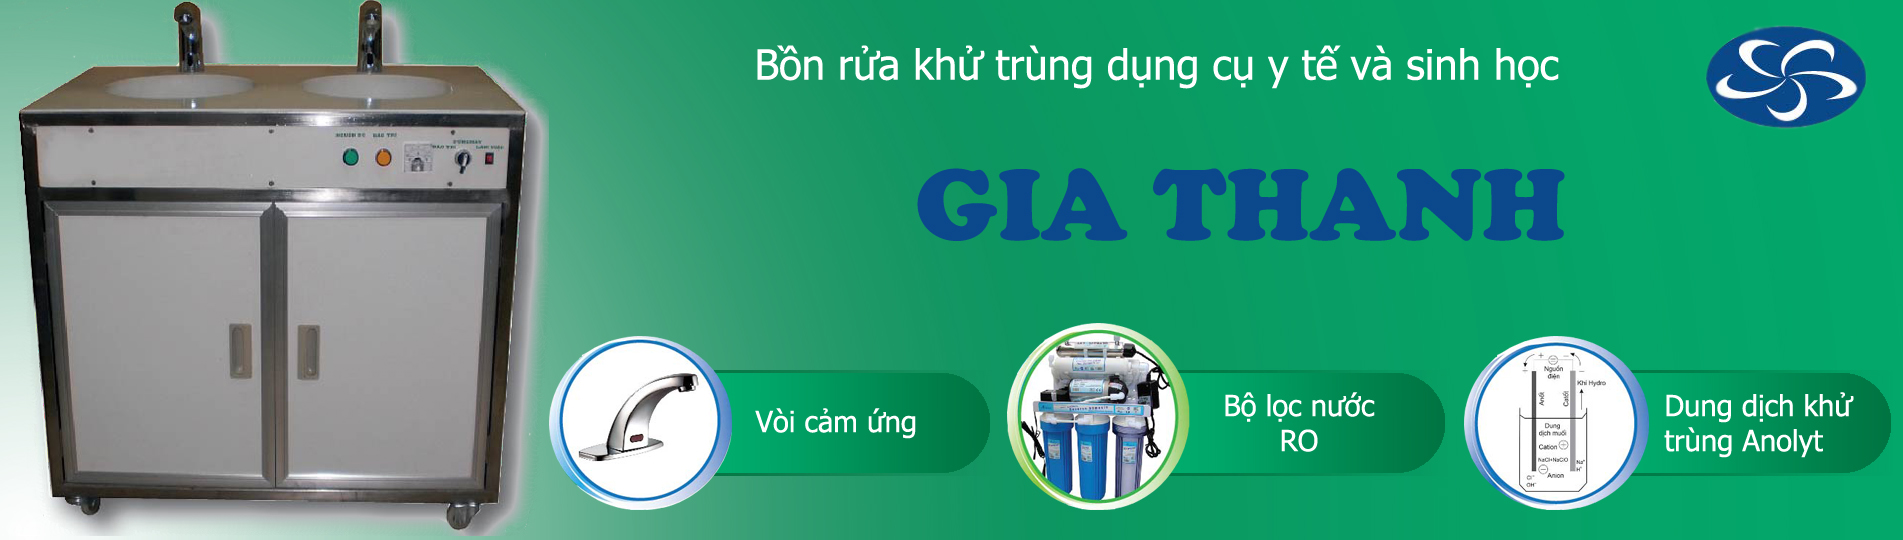 http://gianguyen.vn/gia-thanh